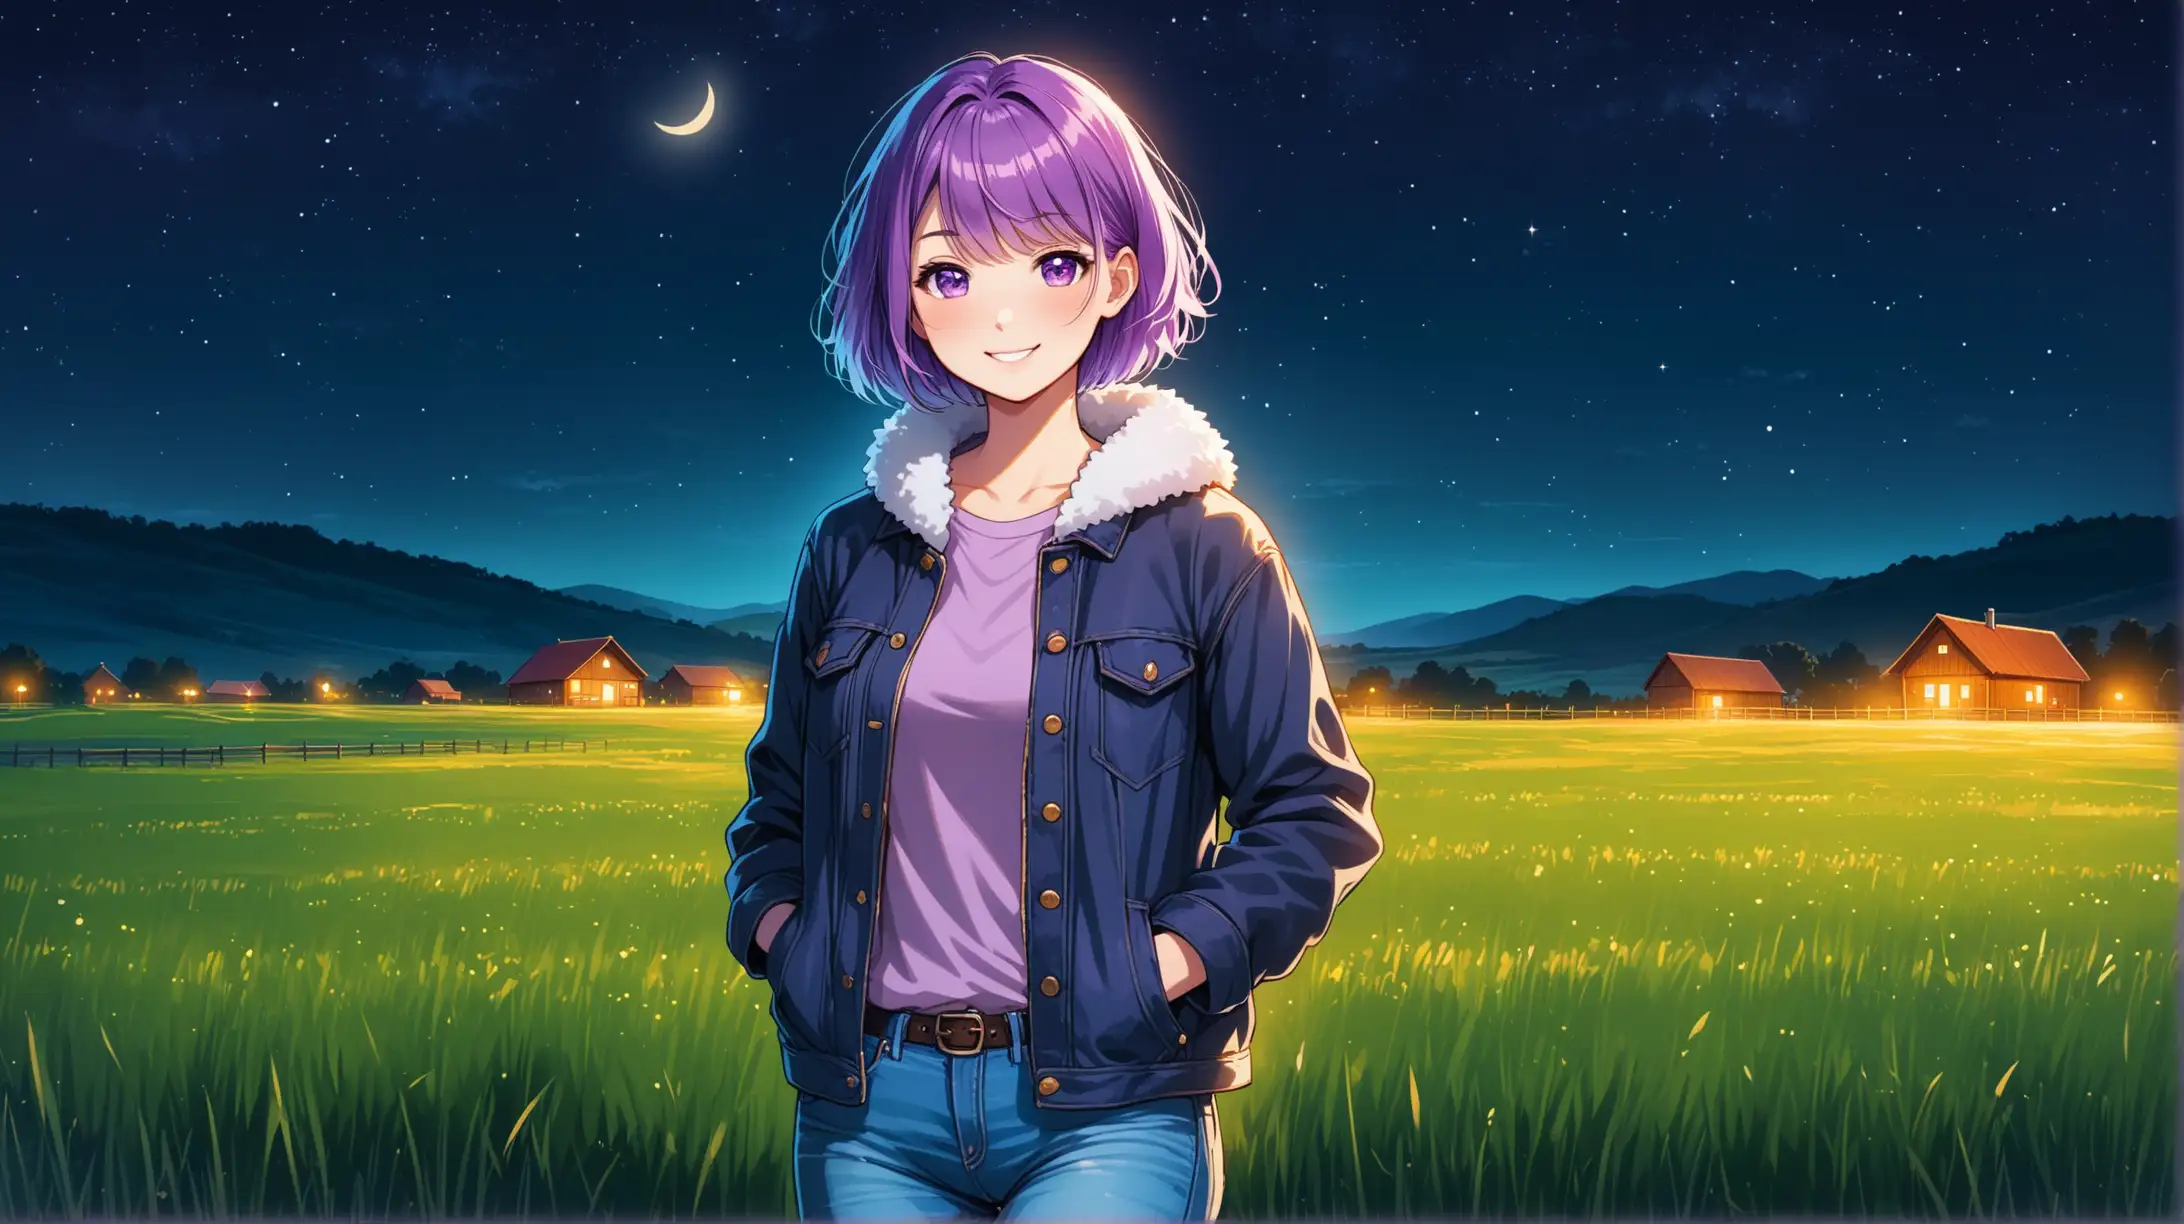 Draw a young woman with short fluffy purple hair and purple eyes standing alone in the countryside outside at night while she is wearing jeans and a jacket with her hands in her pockets and smiling at the viewer